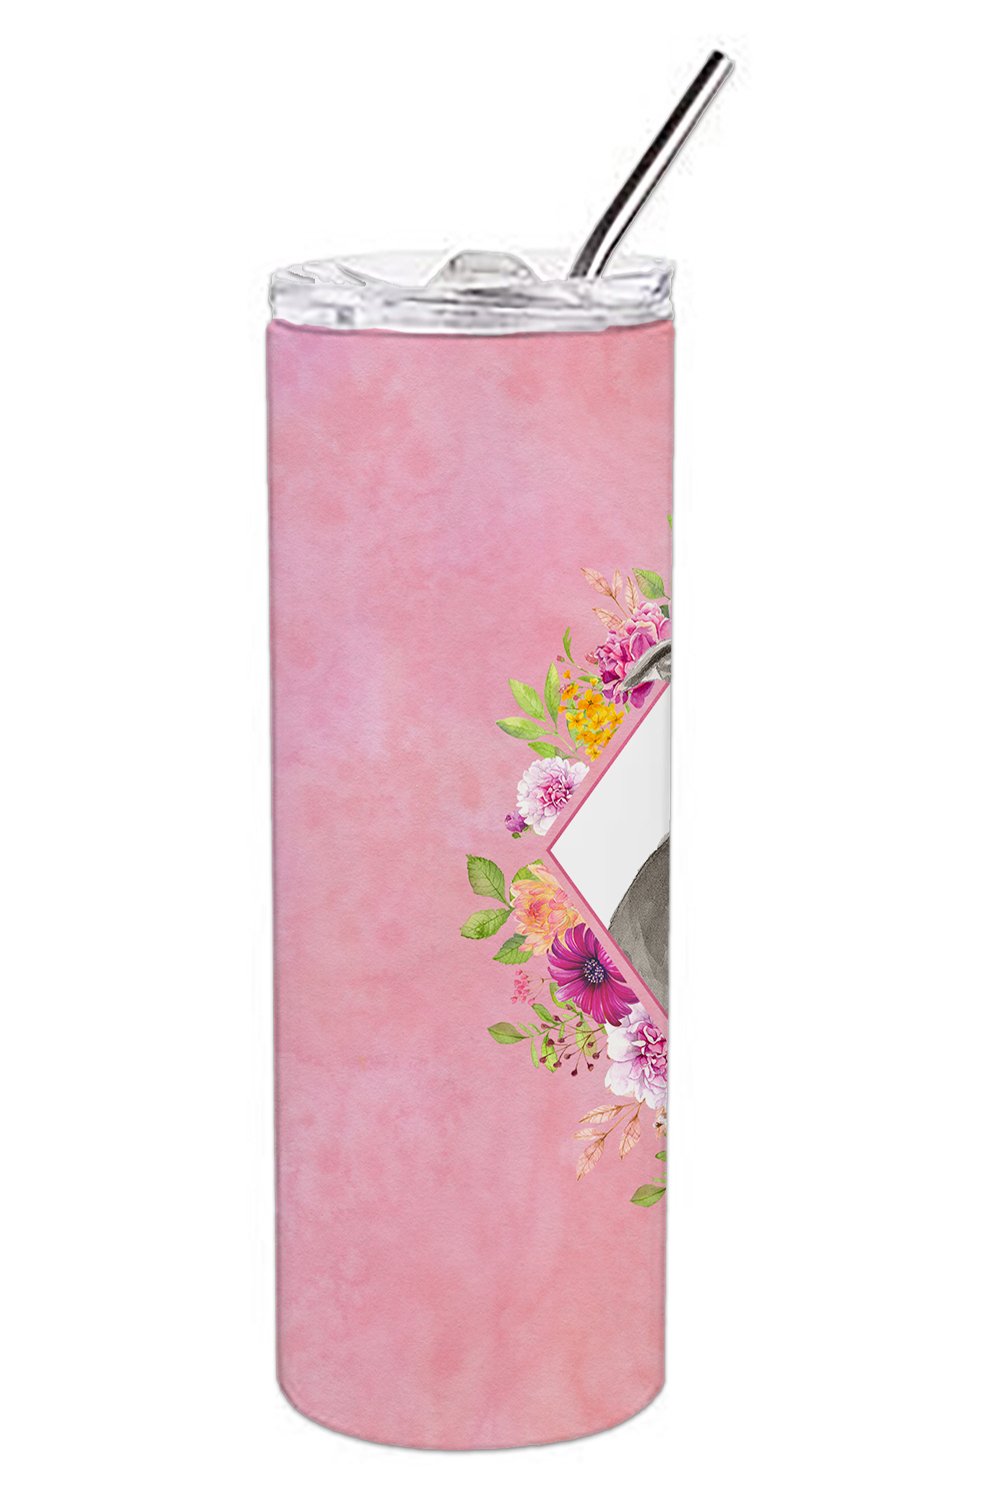 Blue Pit Bull Terrier Pink Flowers Double Walled Stainless Steel 20 oz Skinny Tumbler CK4269TBL20 by Caroline's Treasures